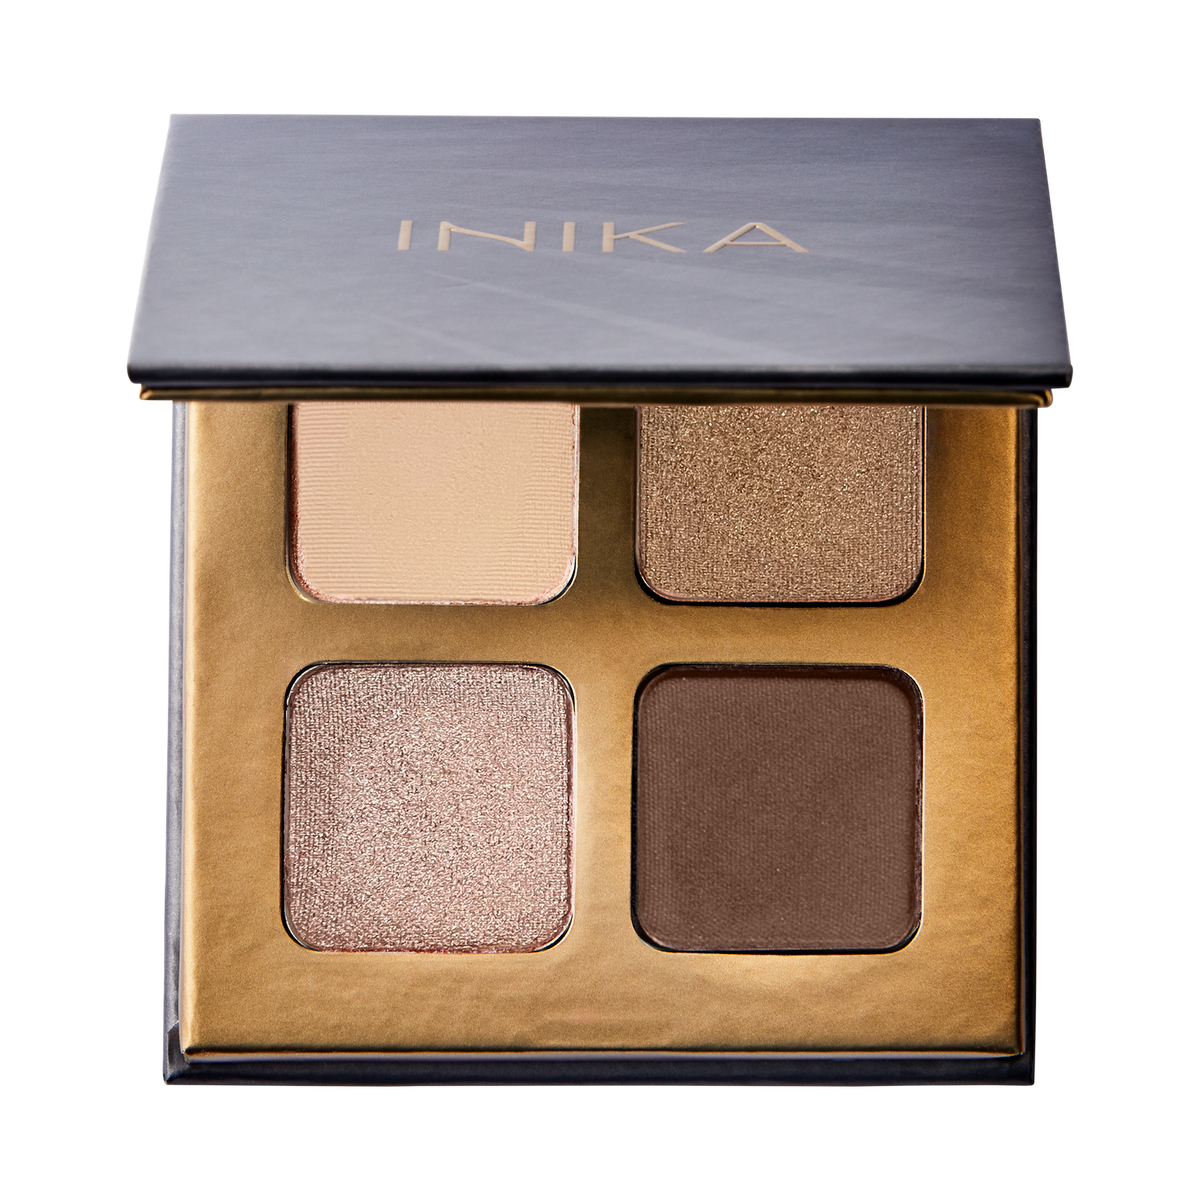 Beautiful Eyeshadow quad. There are four beautiful eyeshadow colors of matte cream color, glowy beige, khaki, and brown. 